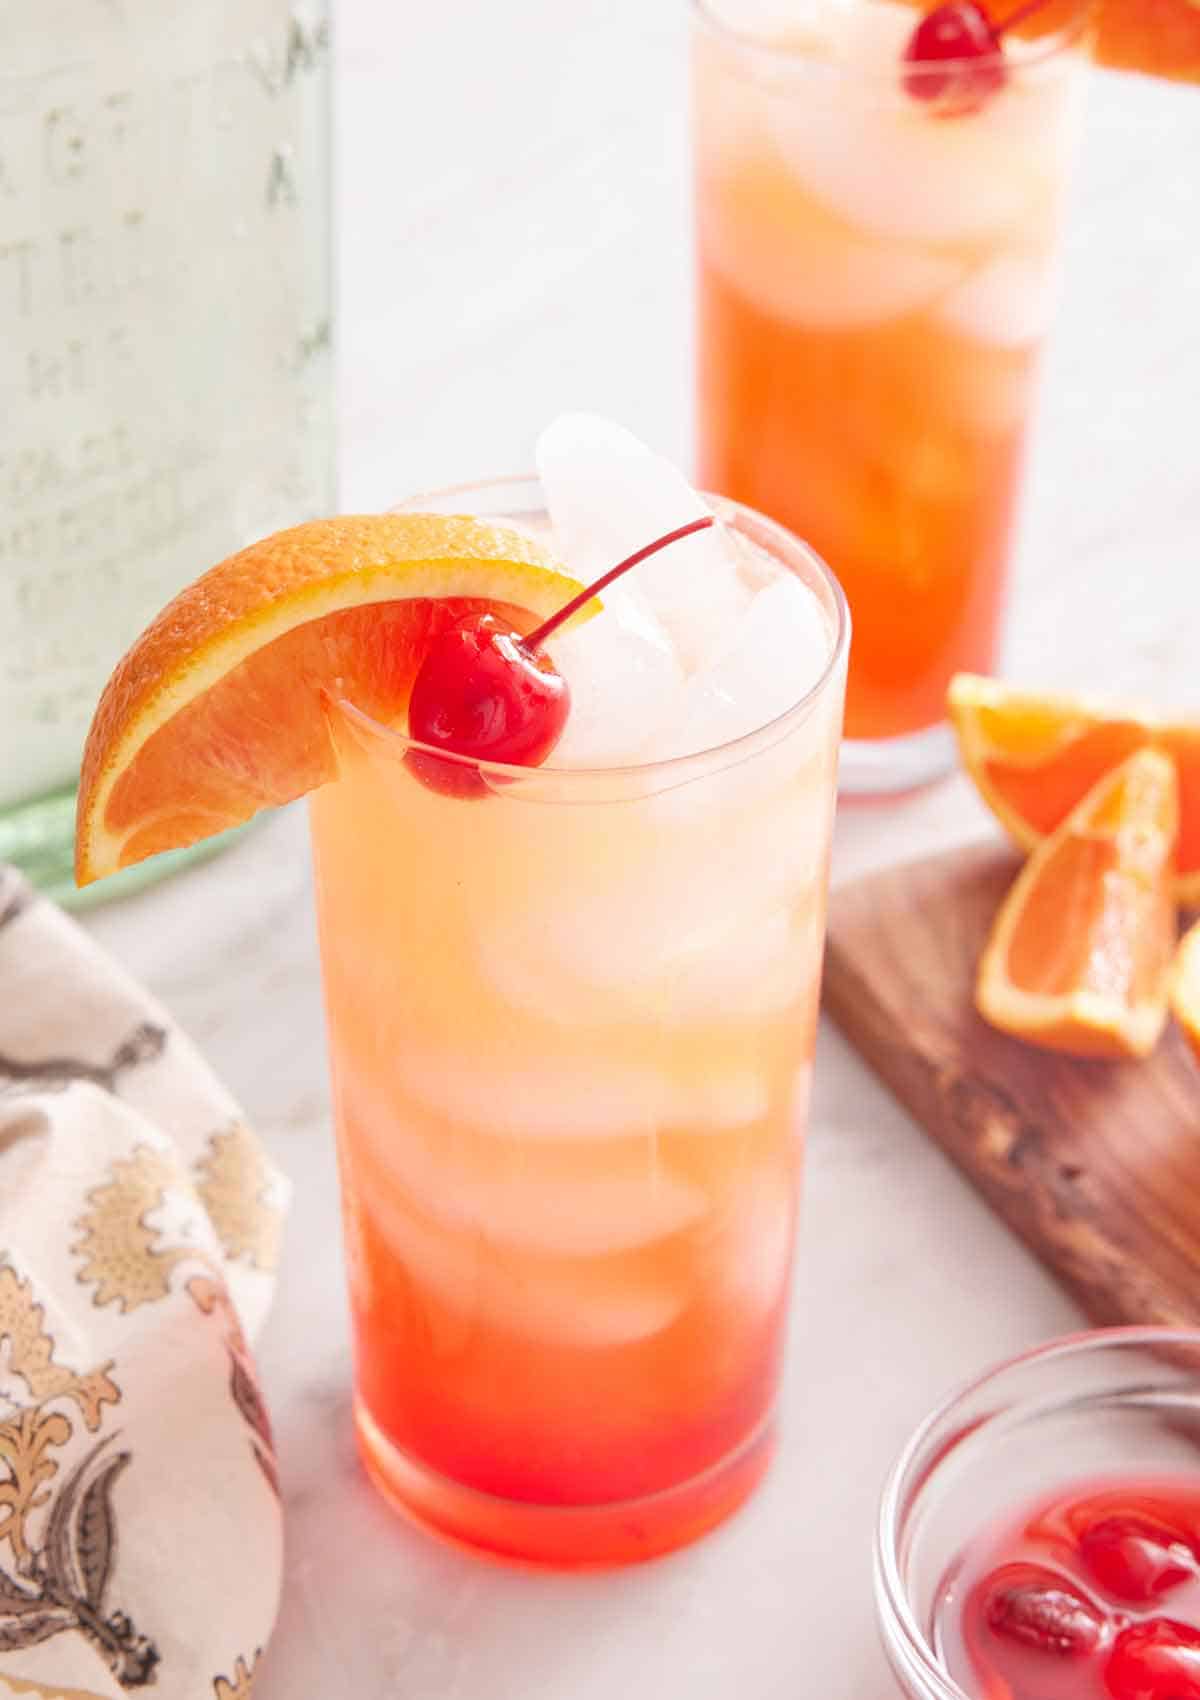 A glass of tequila sunrise with an orange slice and maraschino cherry as garnish. A second glass in the background along with the cut orange slices and tequila bottle.